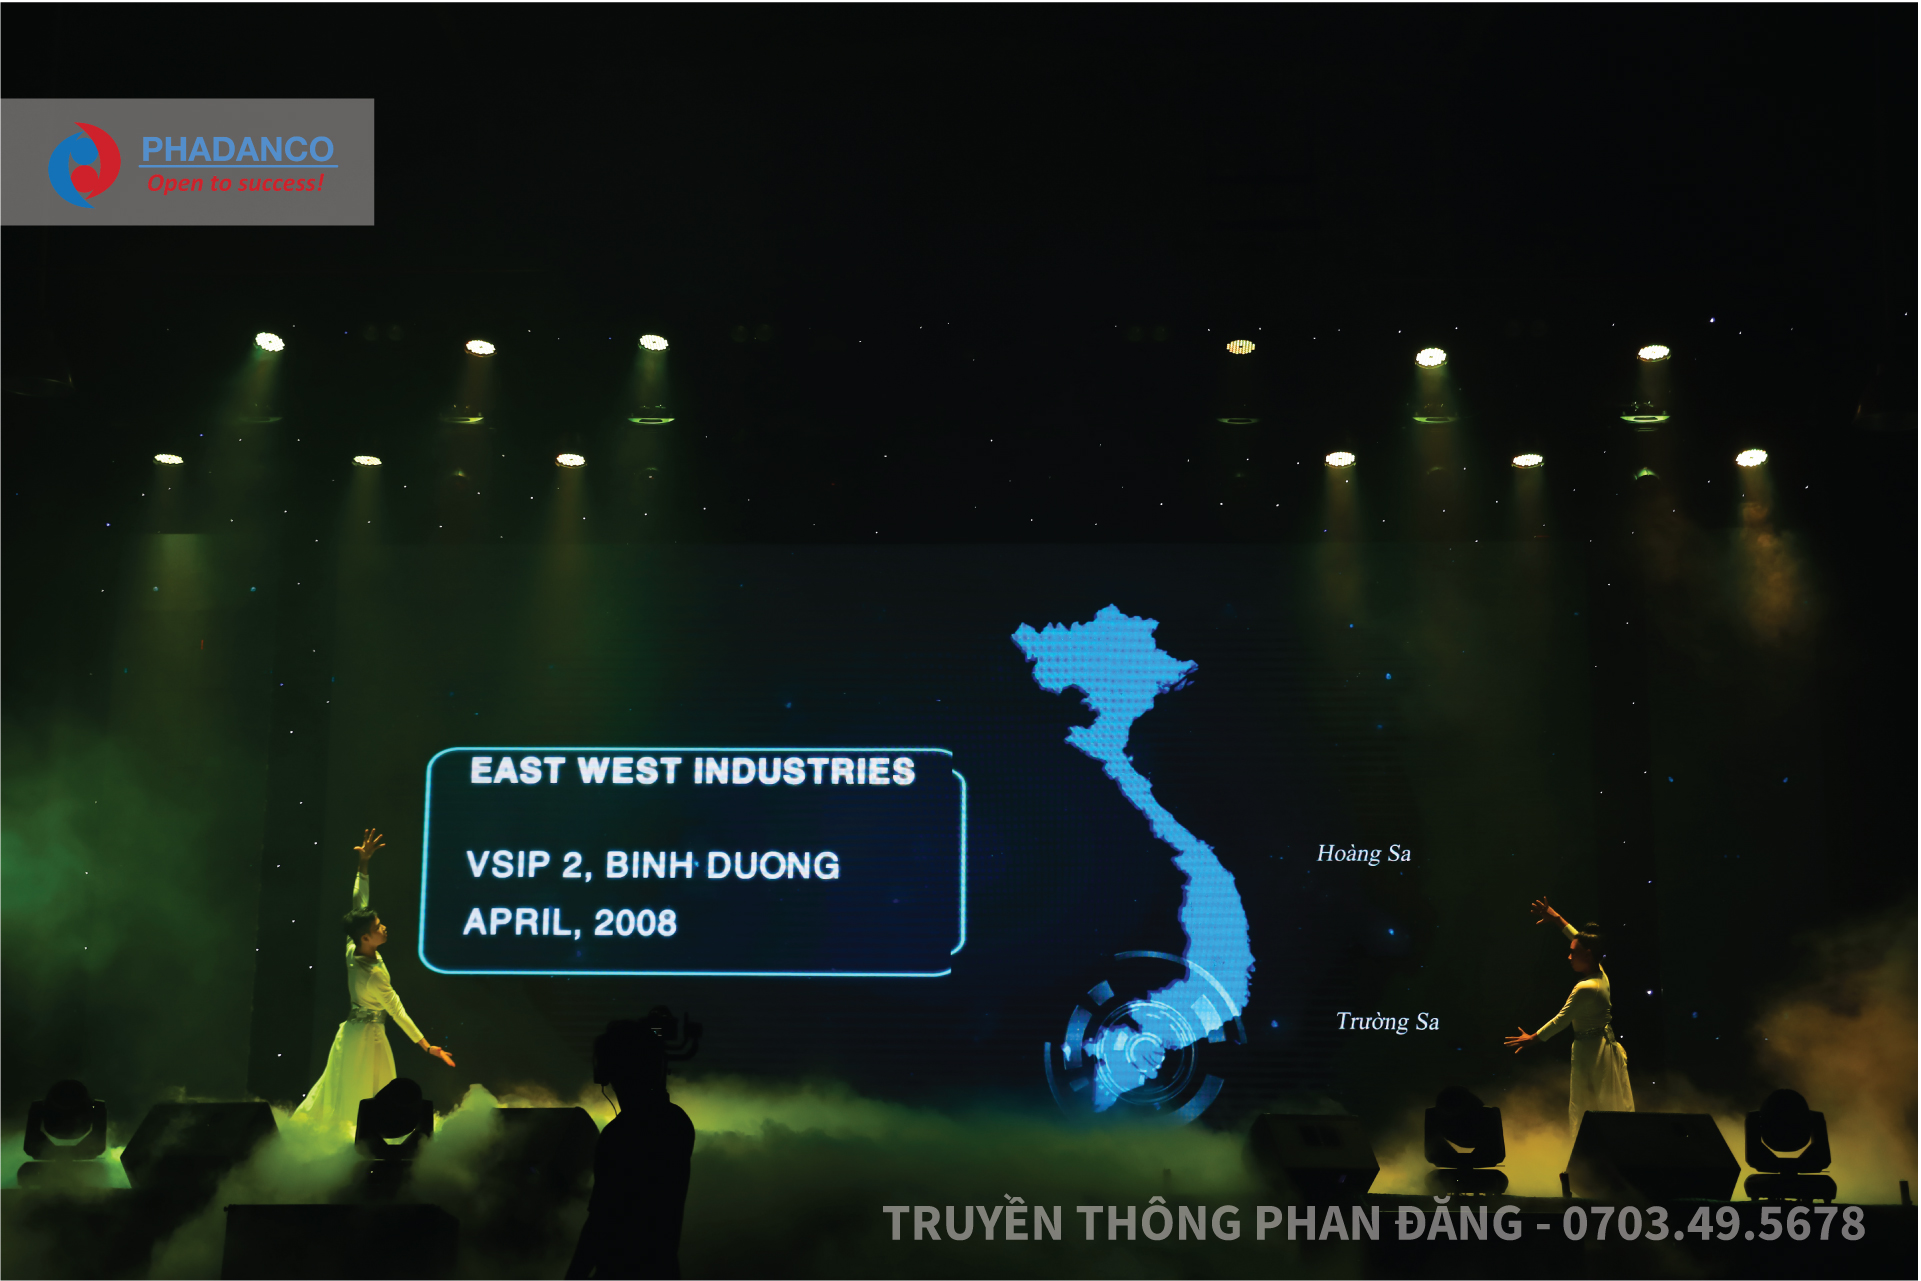 le khanh thanh nha may east west industries ewi